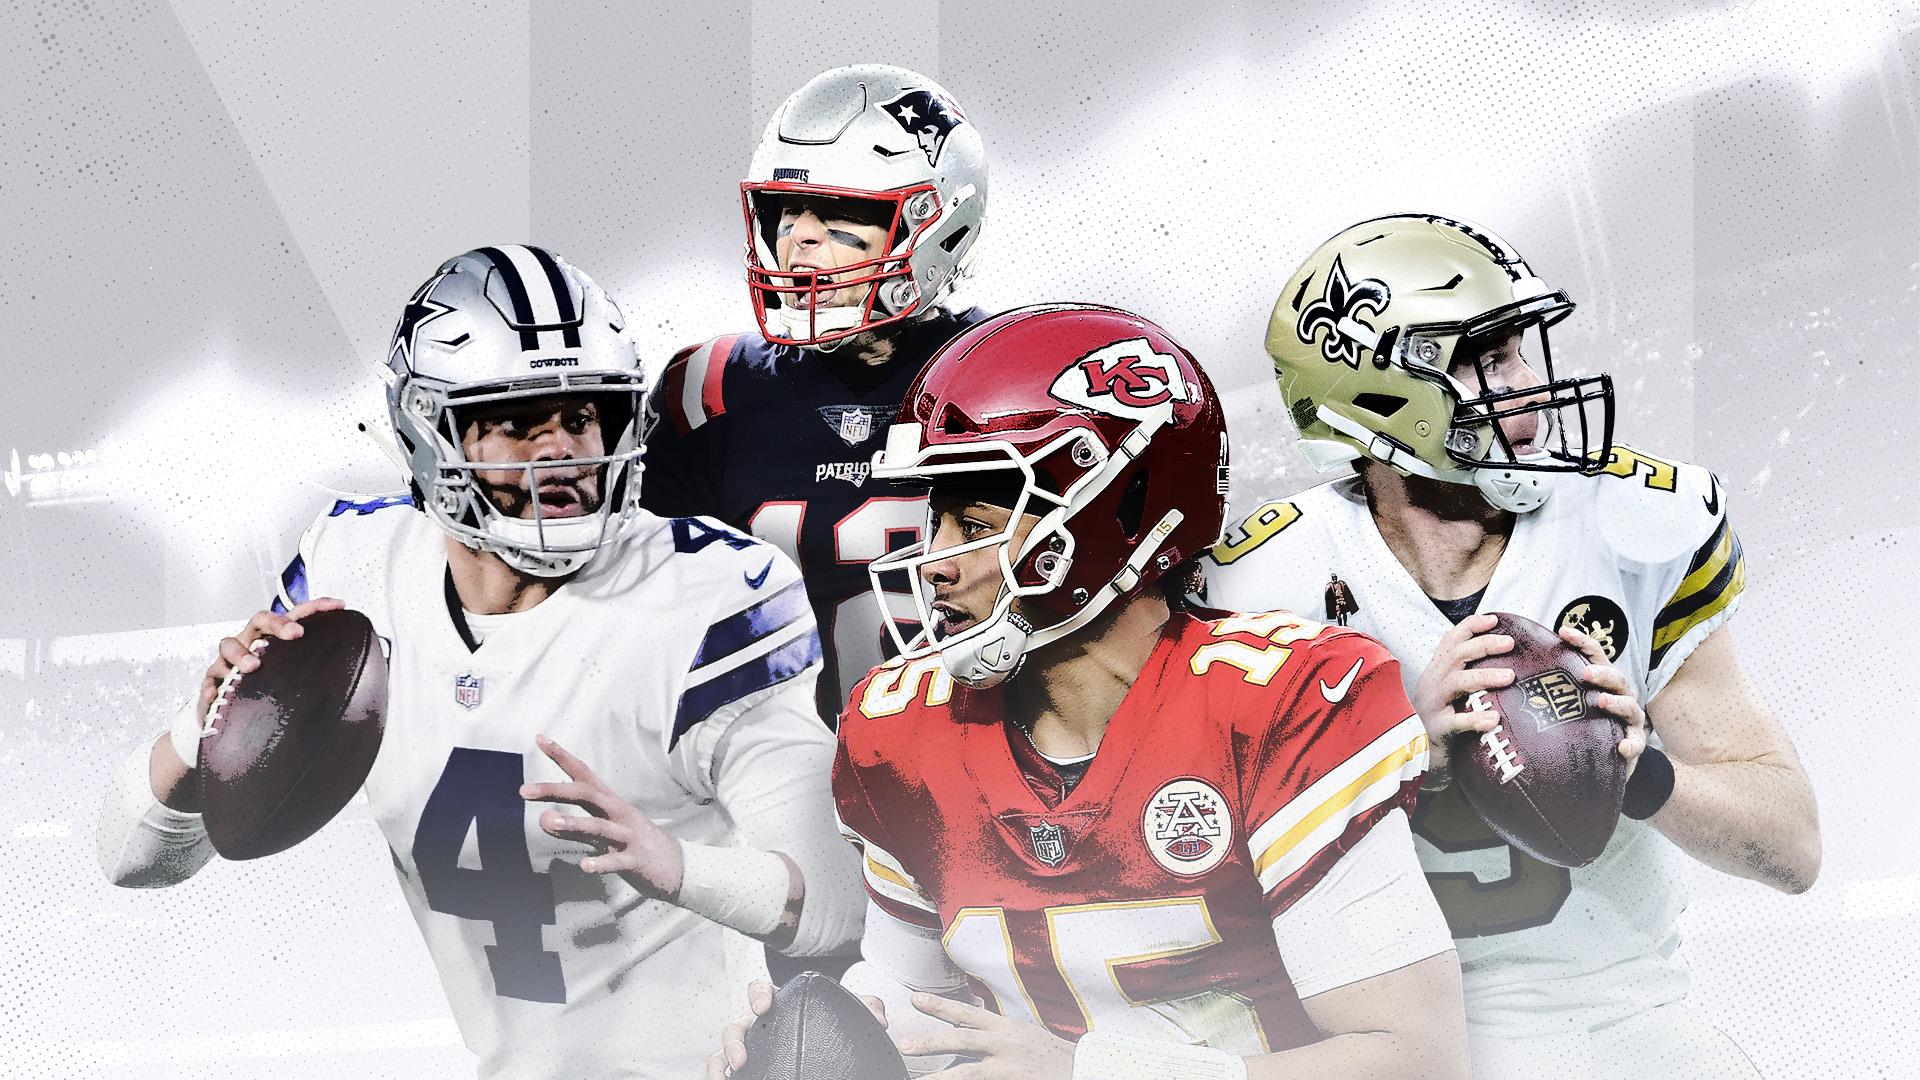 NFL predictions for 2019: Road to Super Bowl 54 ends